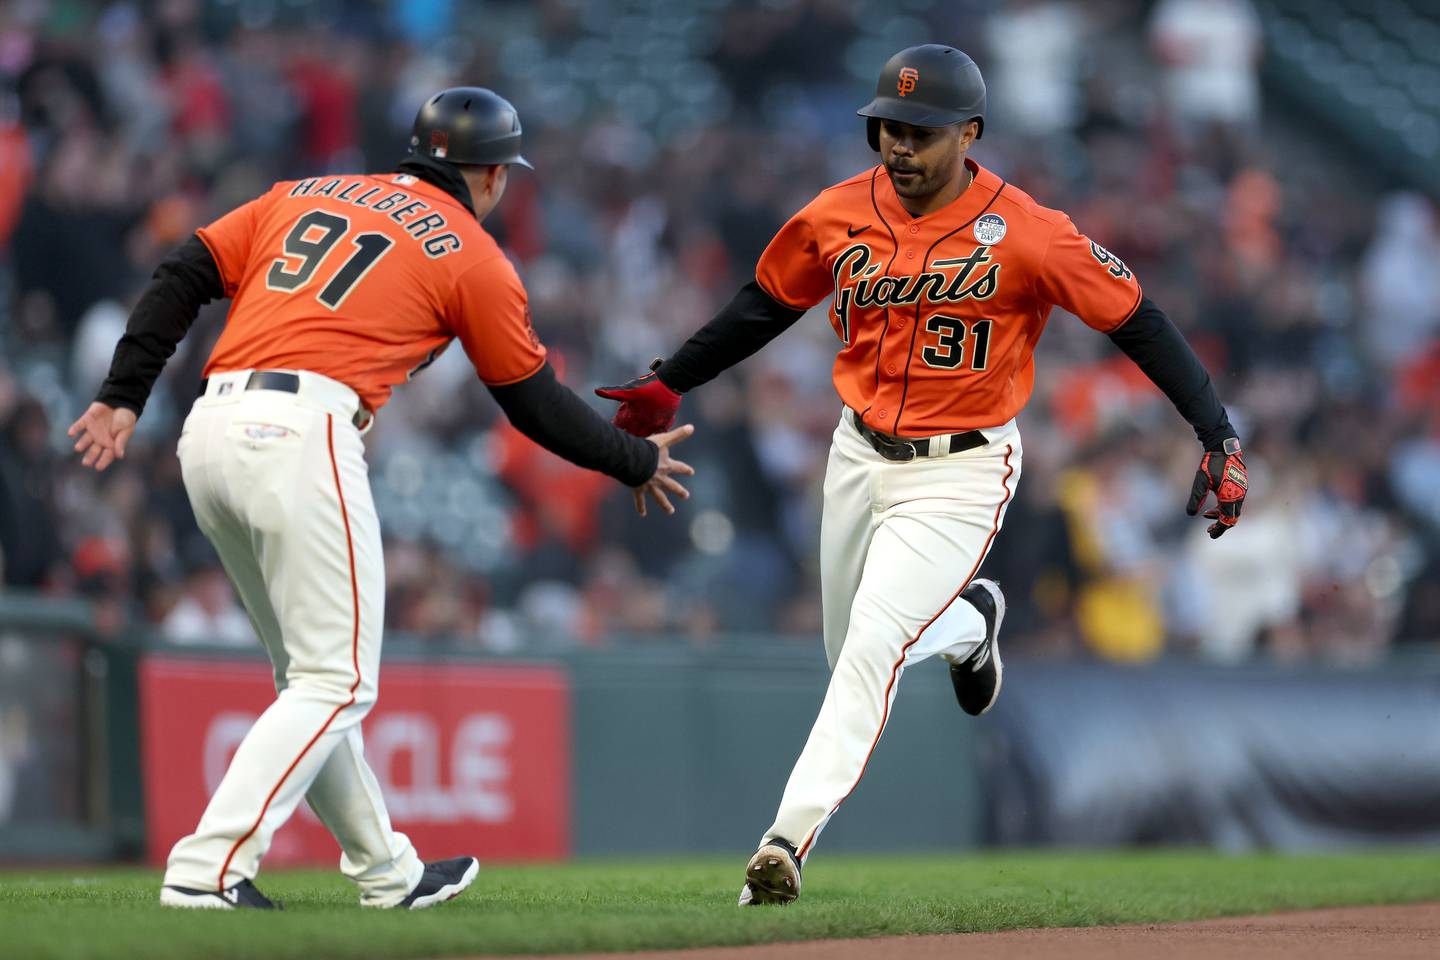 SAN FRANCISCO, CALIFORNIA - JUNE 02: LaMonte Wade Jr. #31 of the San Francisco Giants is congratulated by Mark Hallberg #91 as he rounds the bases after hitting a lead-off home run against the Baltimore Orioles in the first inning on June 02, 2023 in San Francisco, California.